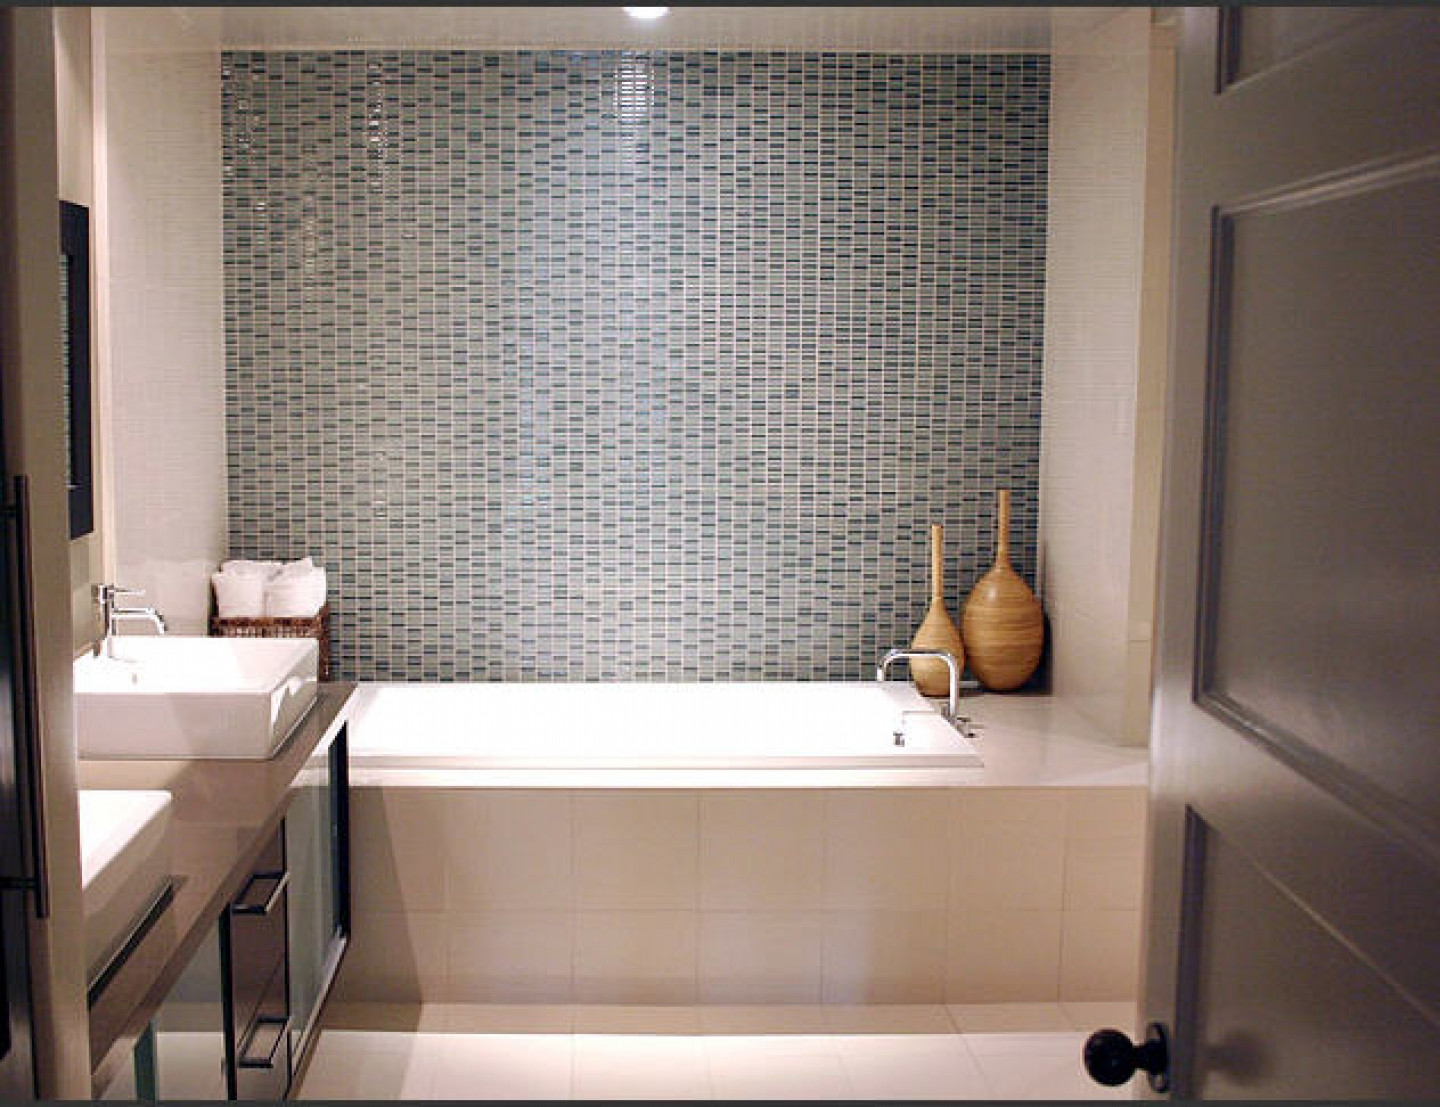 Modern Bathroom Tiles Design
 30 magnificent ideas and pictures of 1950s bathroom tiles